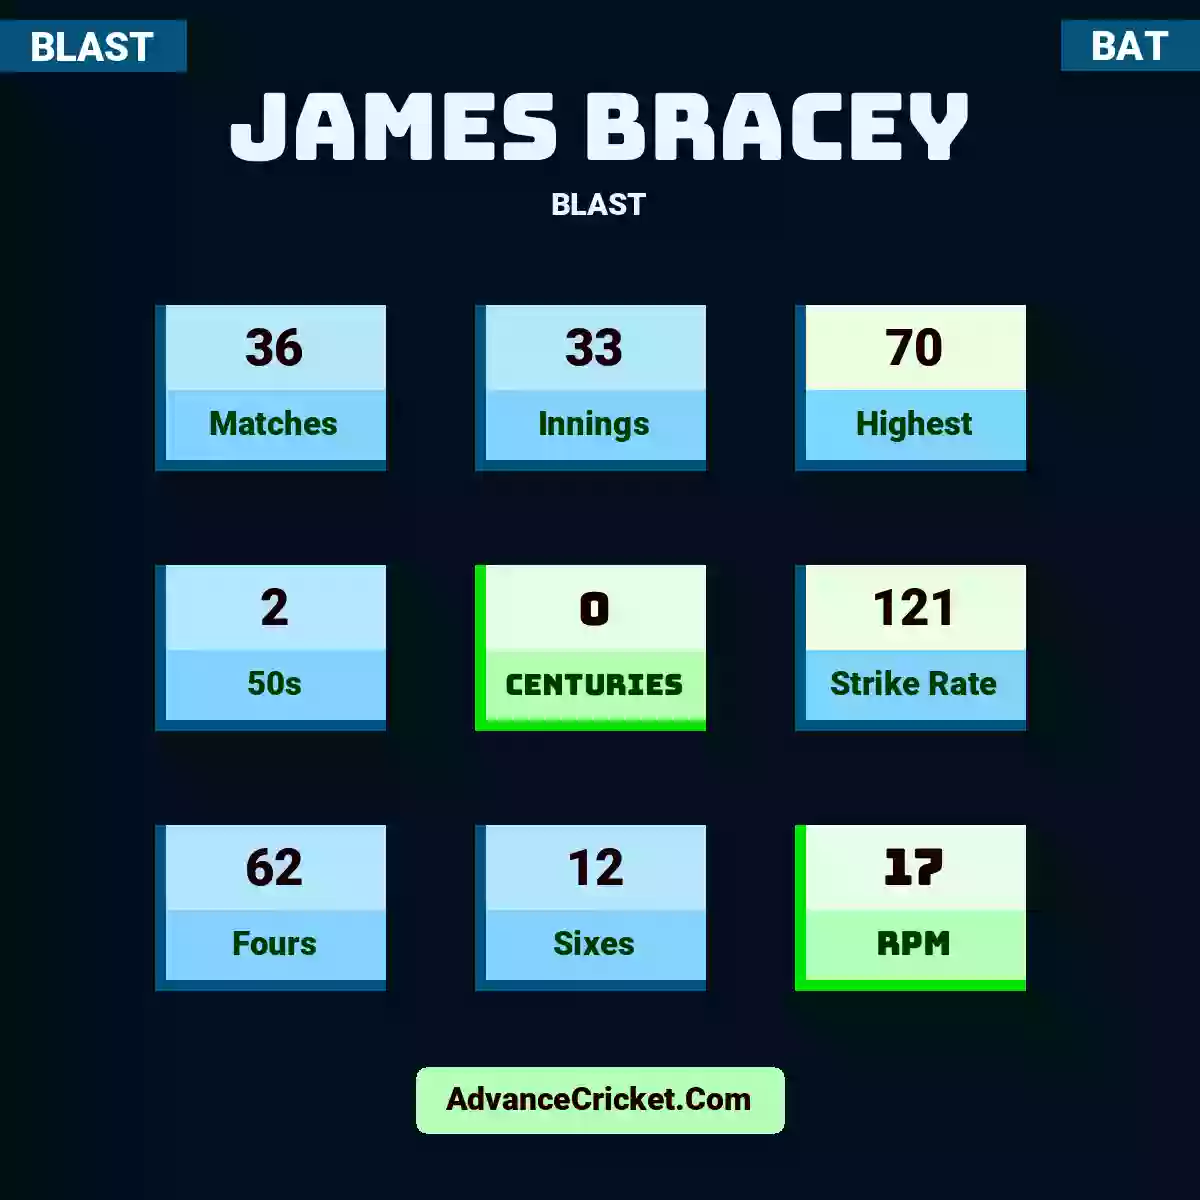 James Bracey BLAST , James Bracey played 36 matches, scored 70 runs as highest, 2 half-centuries, and 0 centuries, with a strike rate of 121. J.Bracey hit 62 fours and 12 sixes, with an RPM of 17.